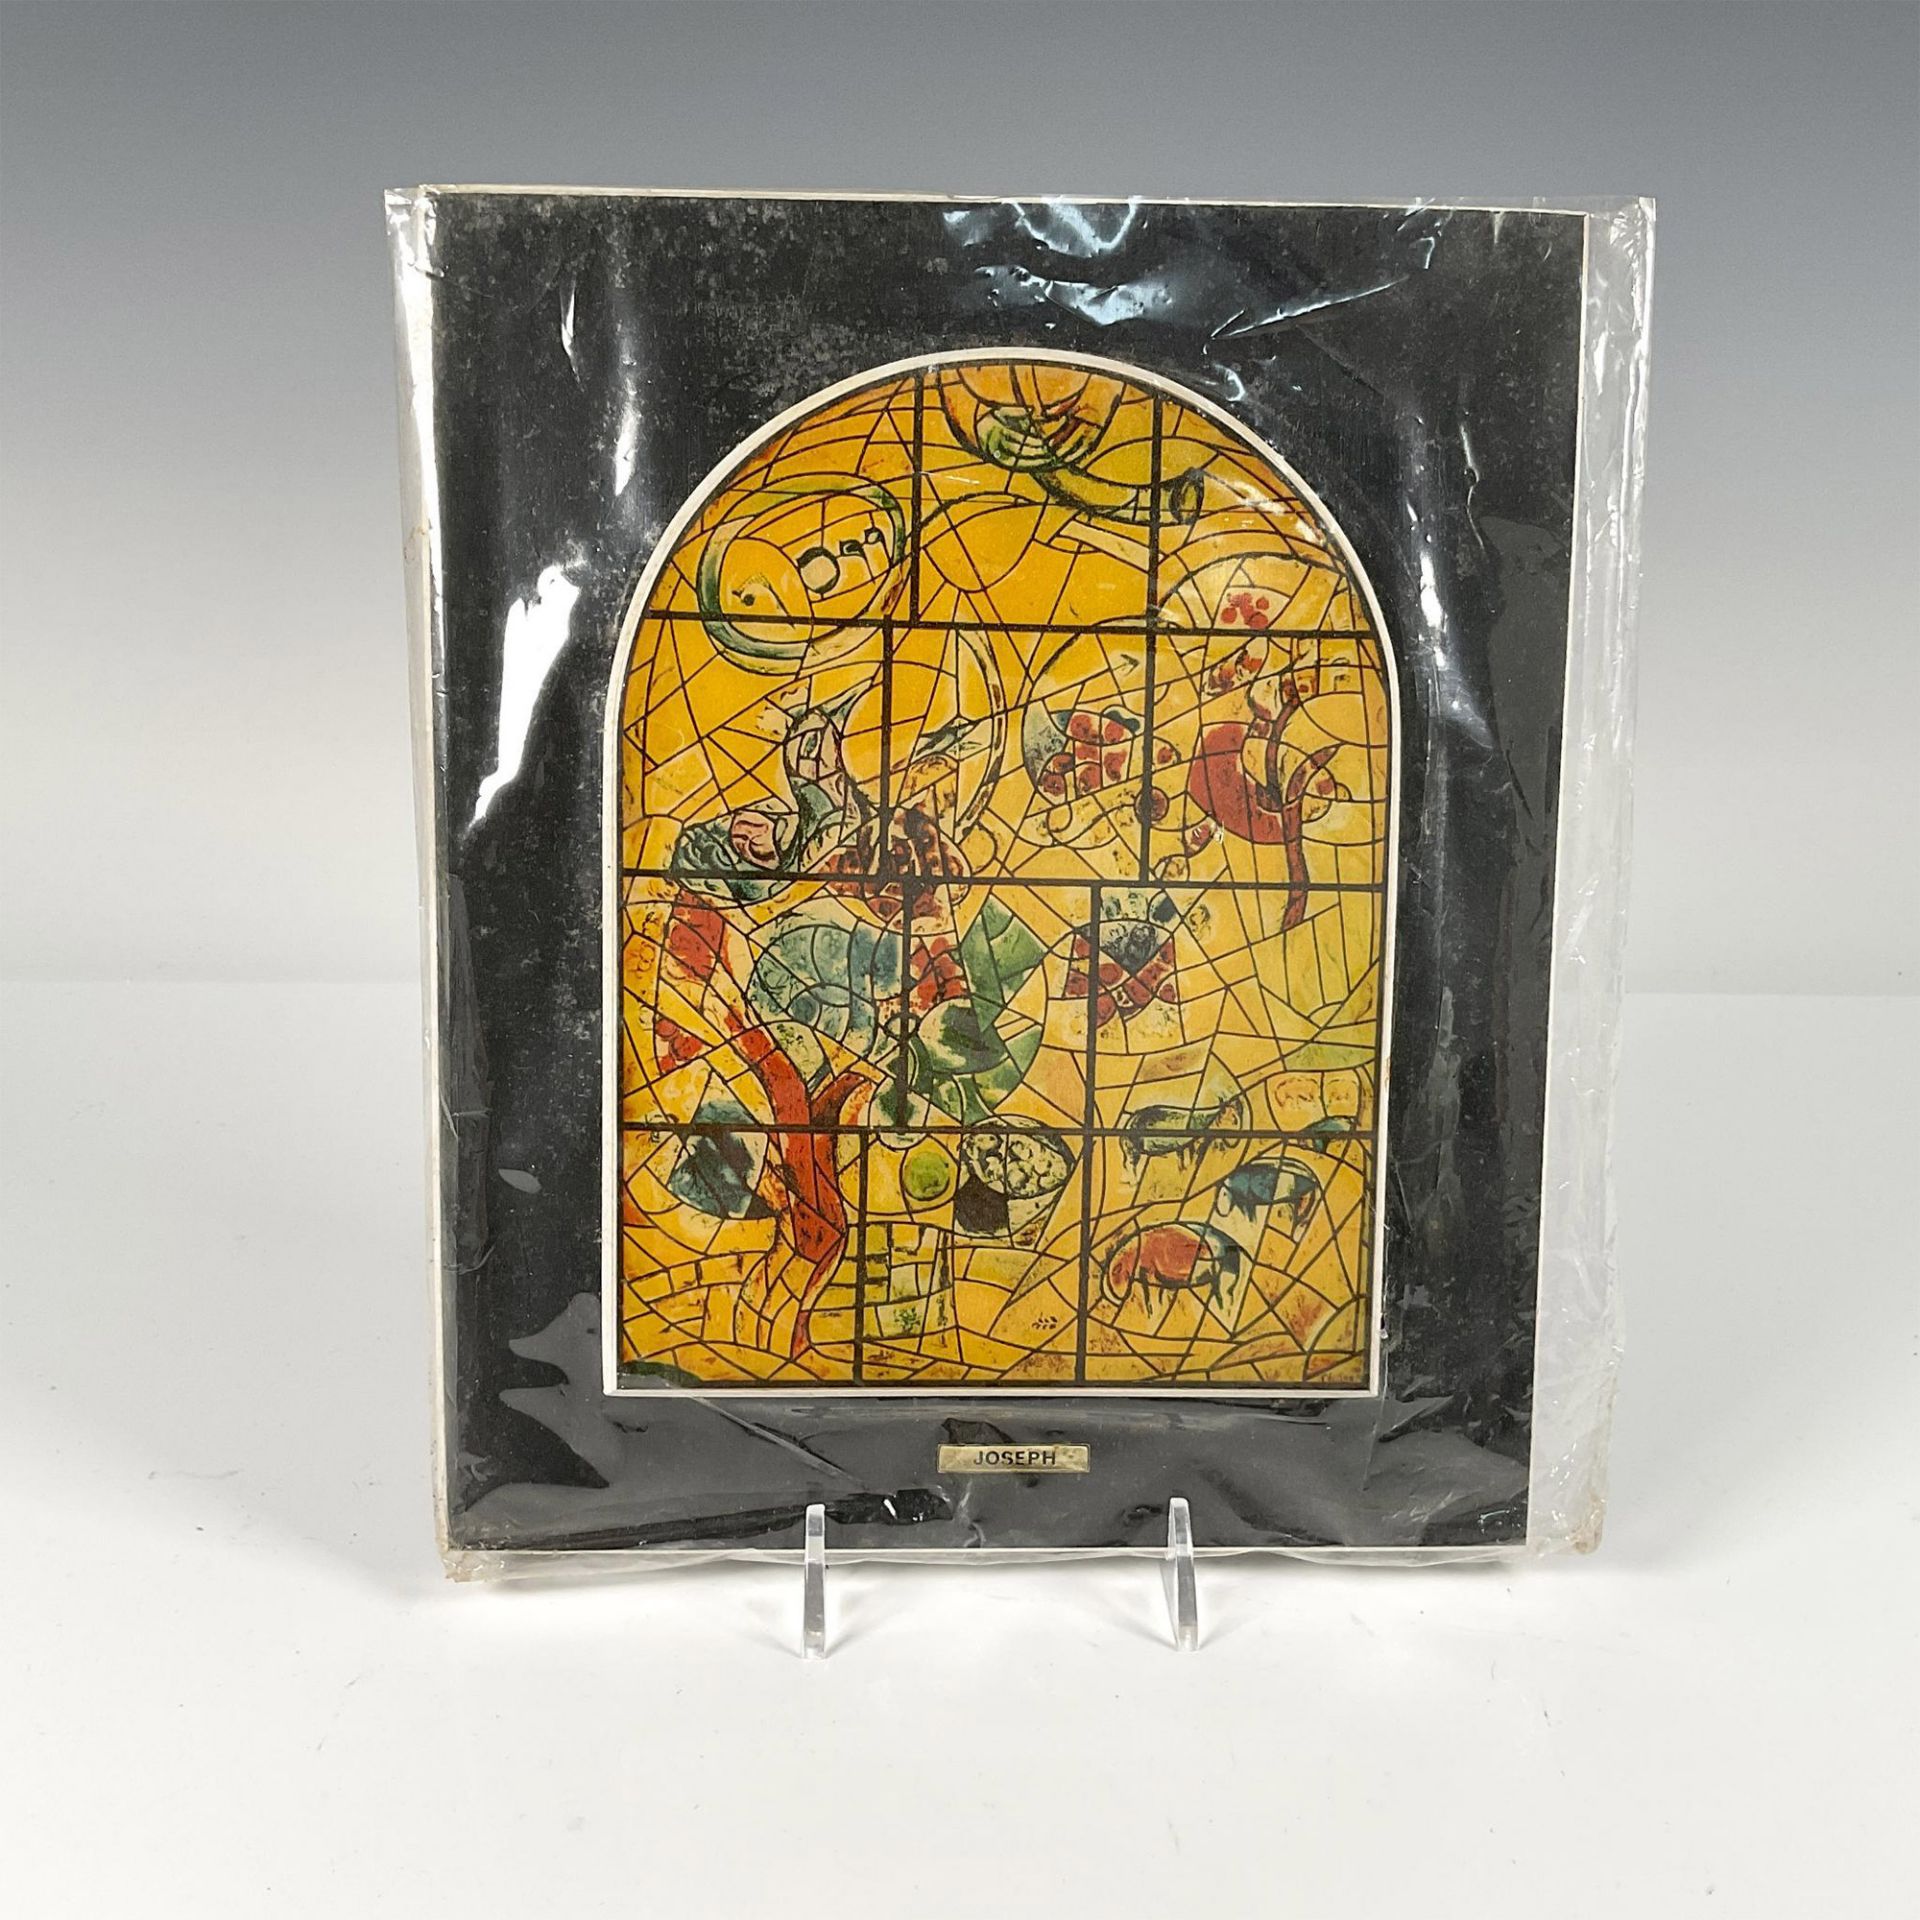 13pc After Marc Chagall by Avissar Wooden Plaques, The 12 Stained Glass Windows - Bild 19 aus 20